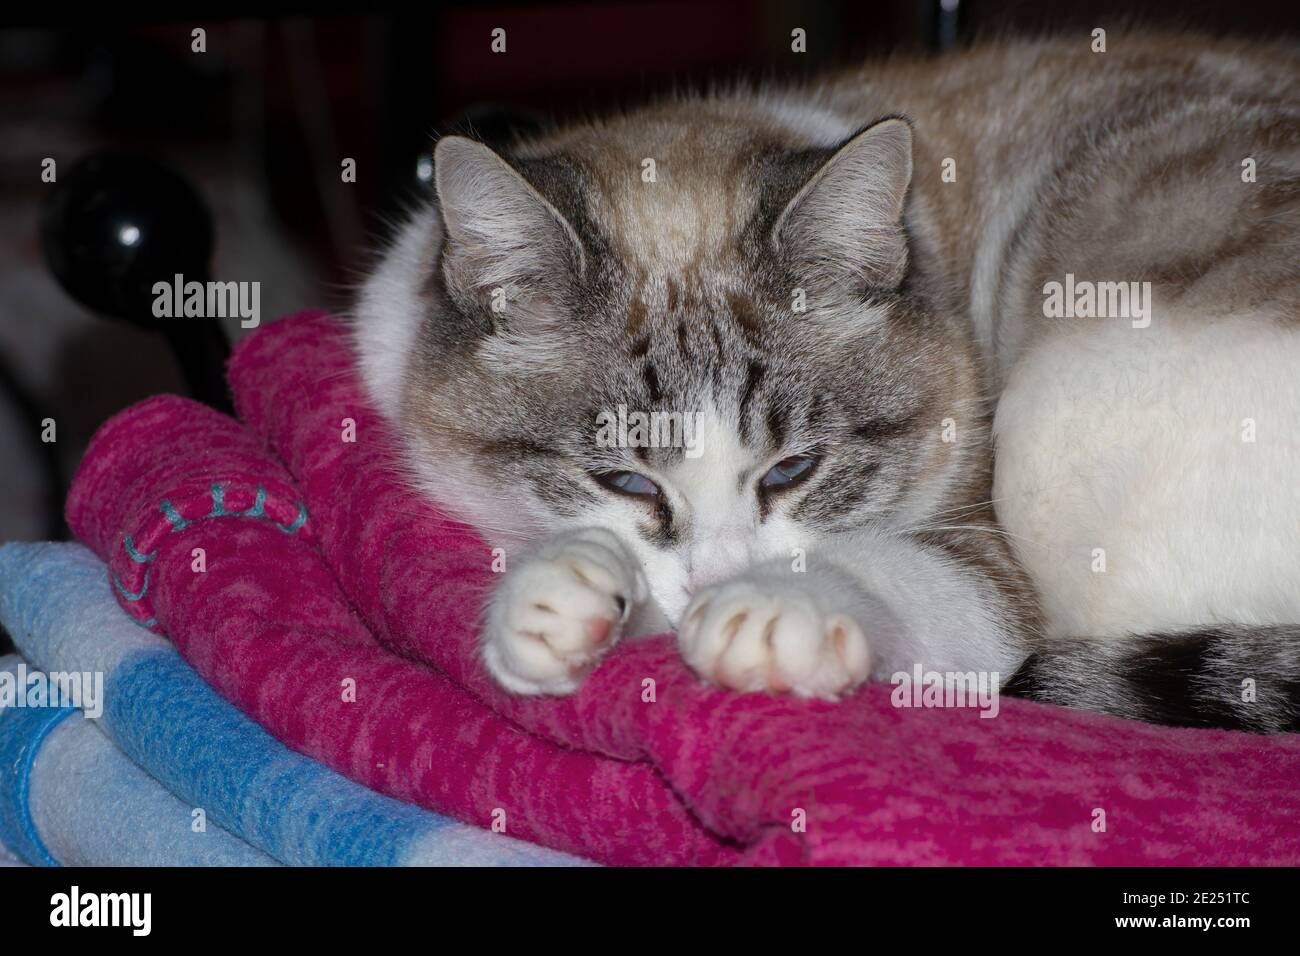 portrait of a tabby cat lying down on bed Stock Photo